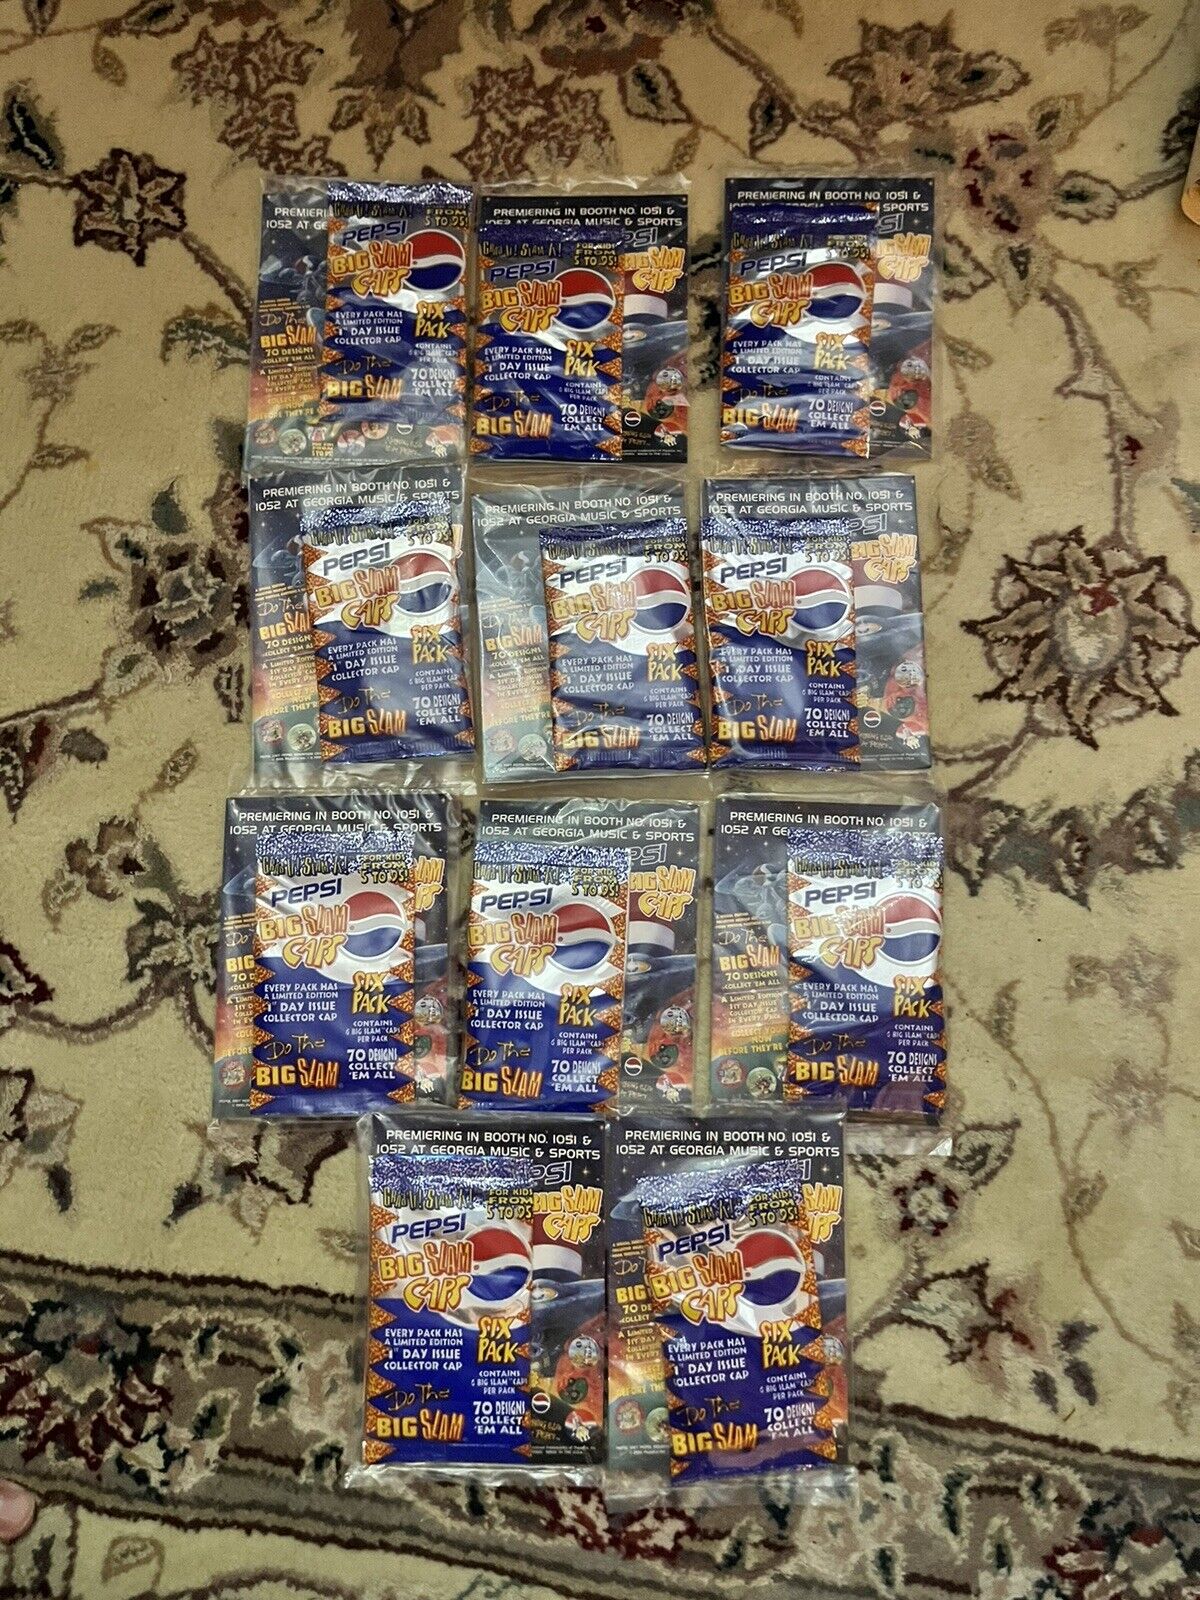 11 Sealed 1st Day Issue Pepsi Big Slam Caps (from Georgia Music & Sports)